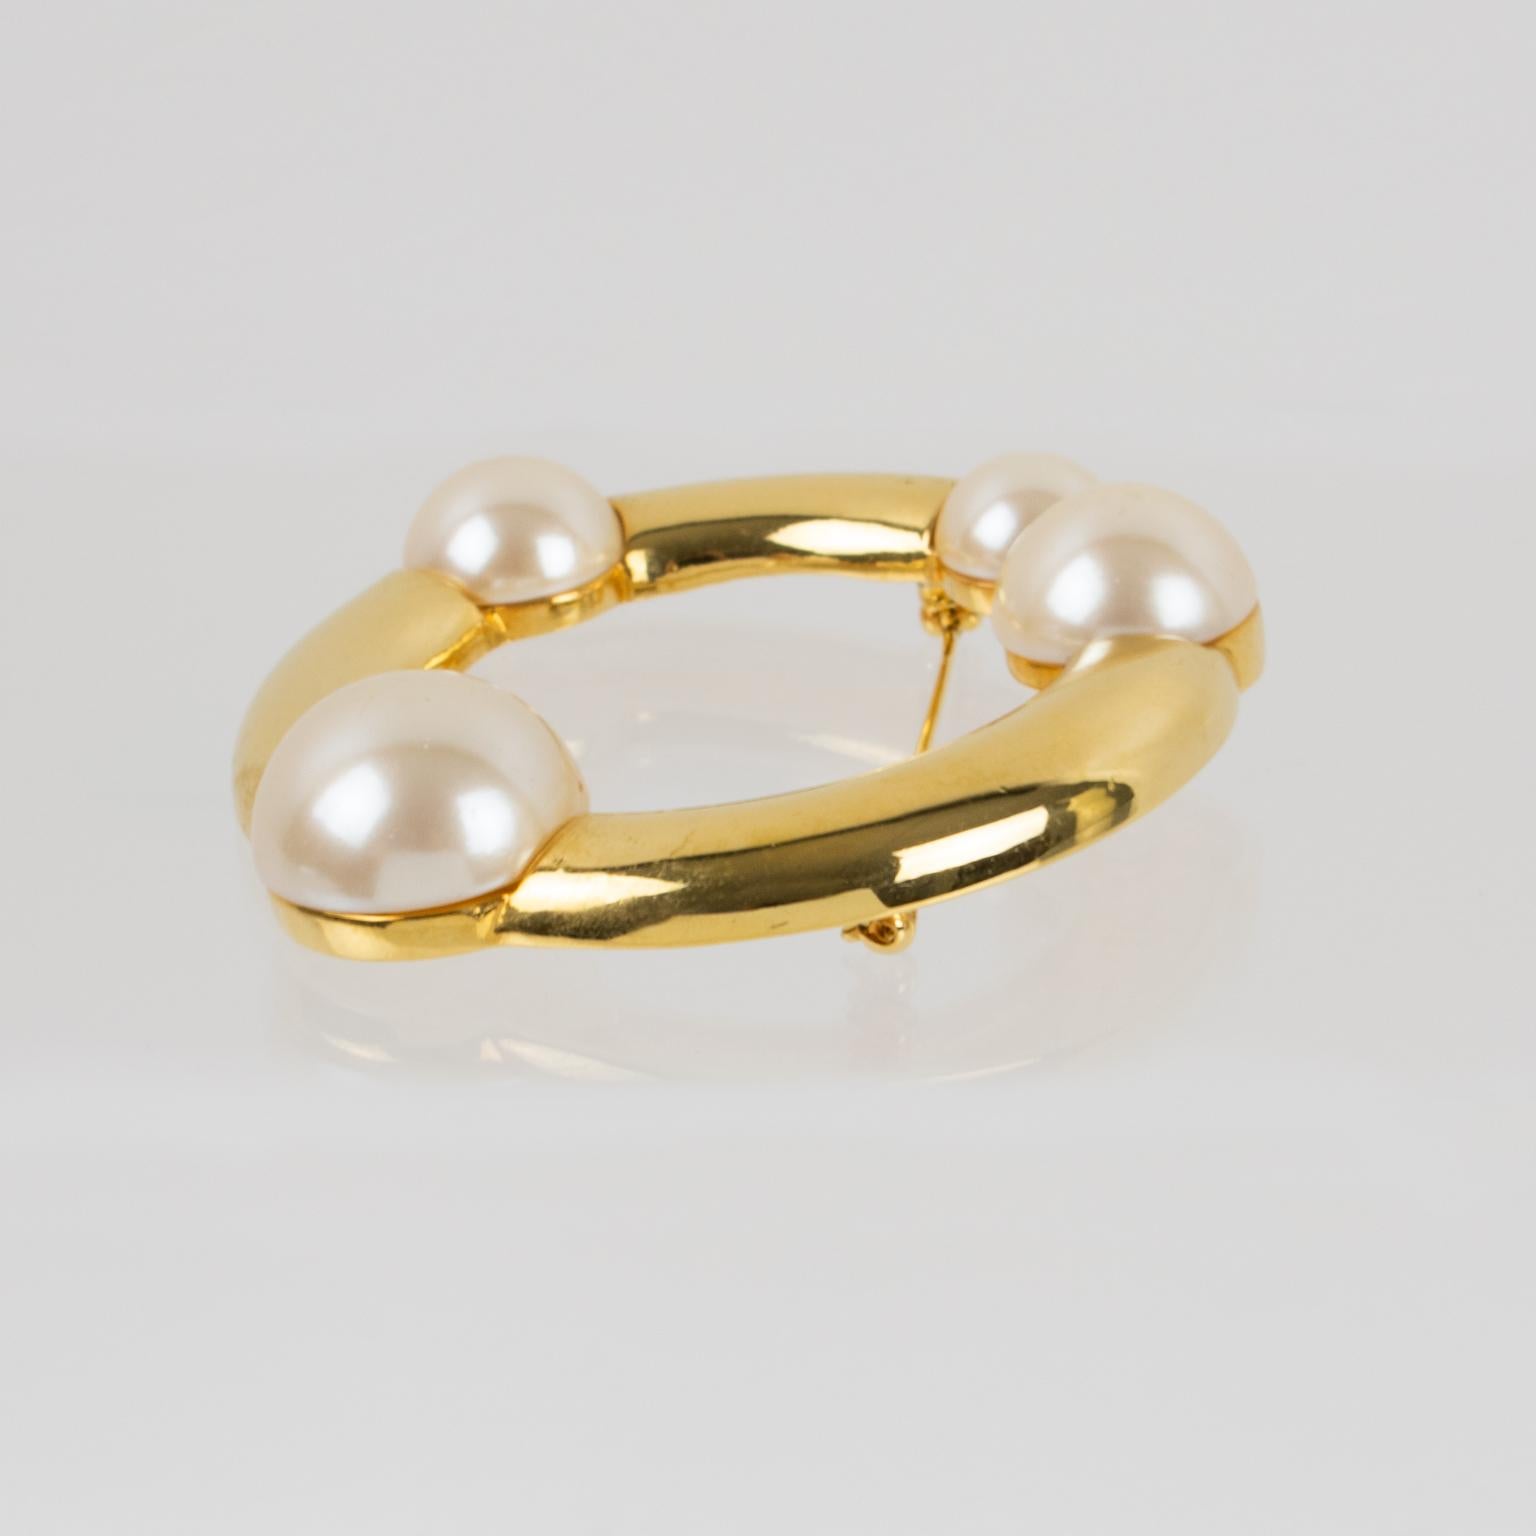 Courreges Paris Gilt Metal and Pearl Modernist Pin Brooch 3